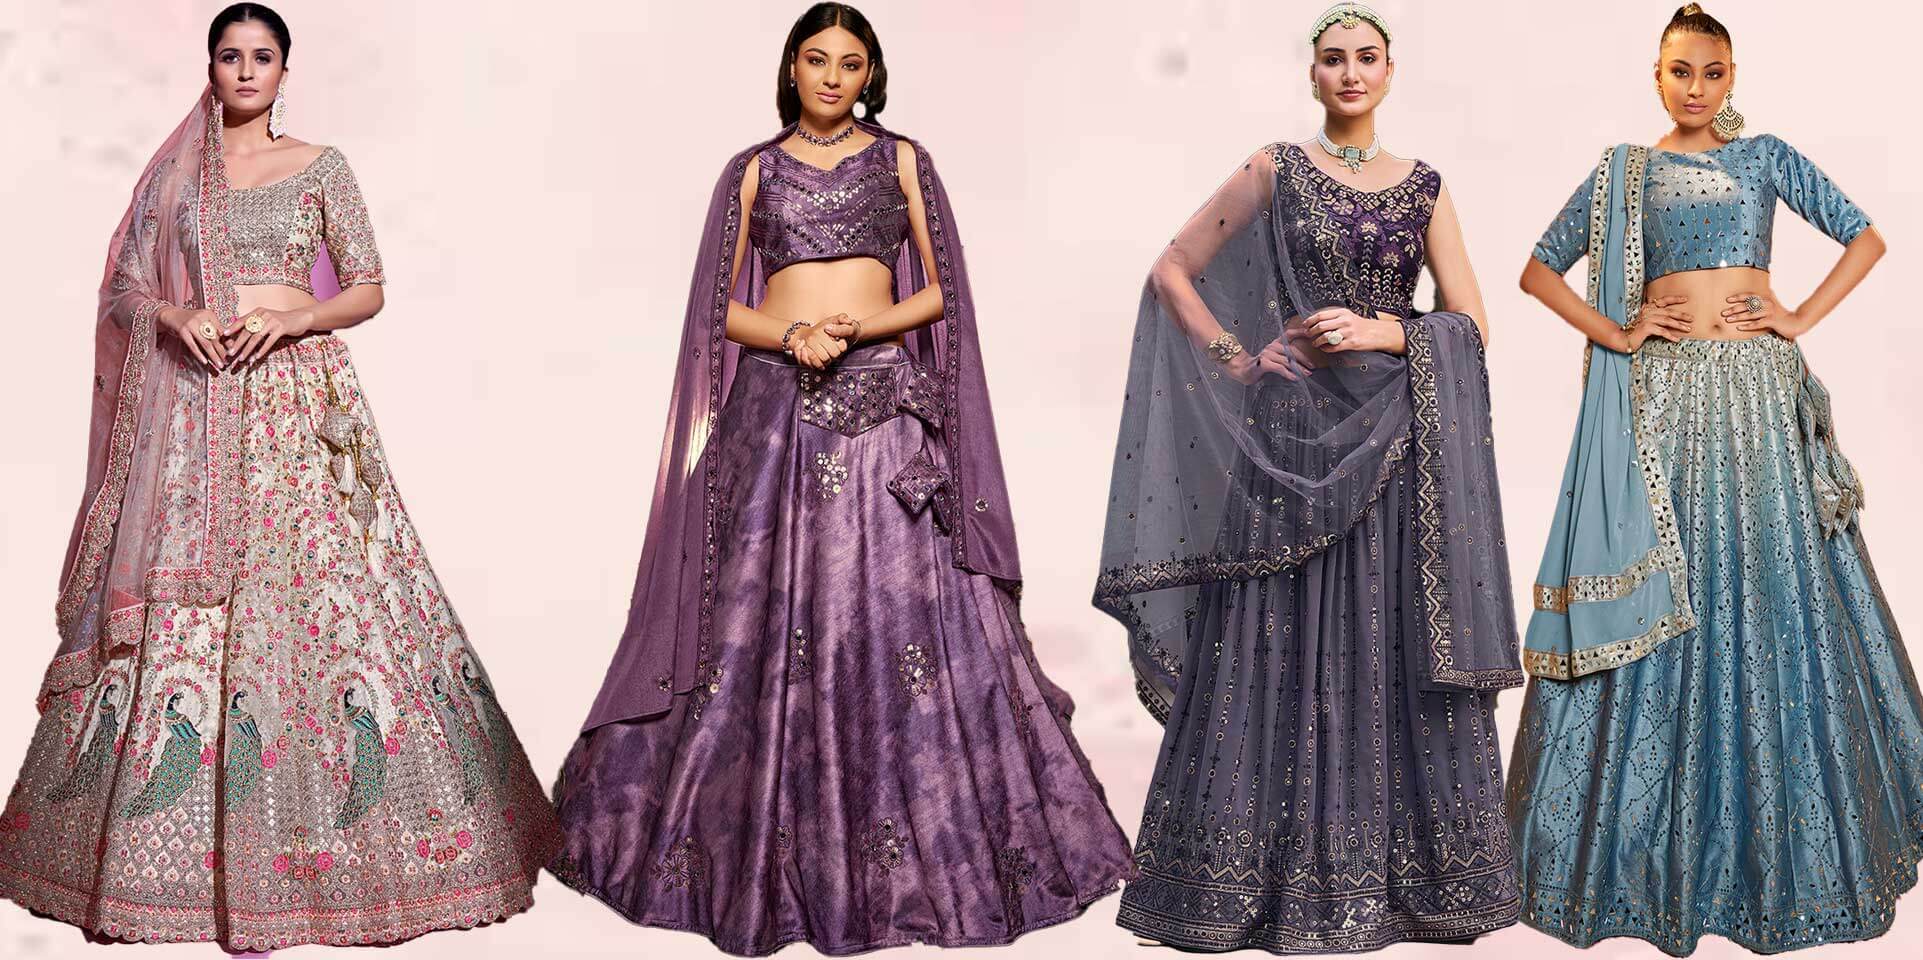 What is the Best Place to Buy Bollywood Lehenga in USA Online?